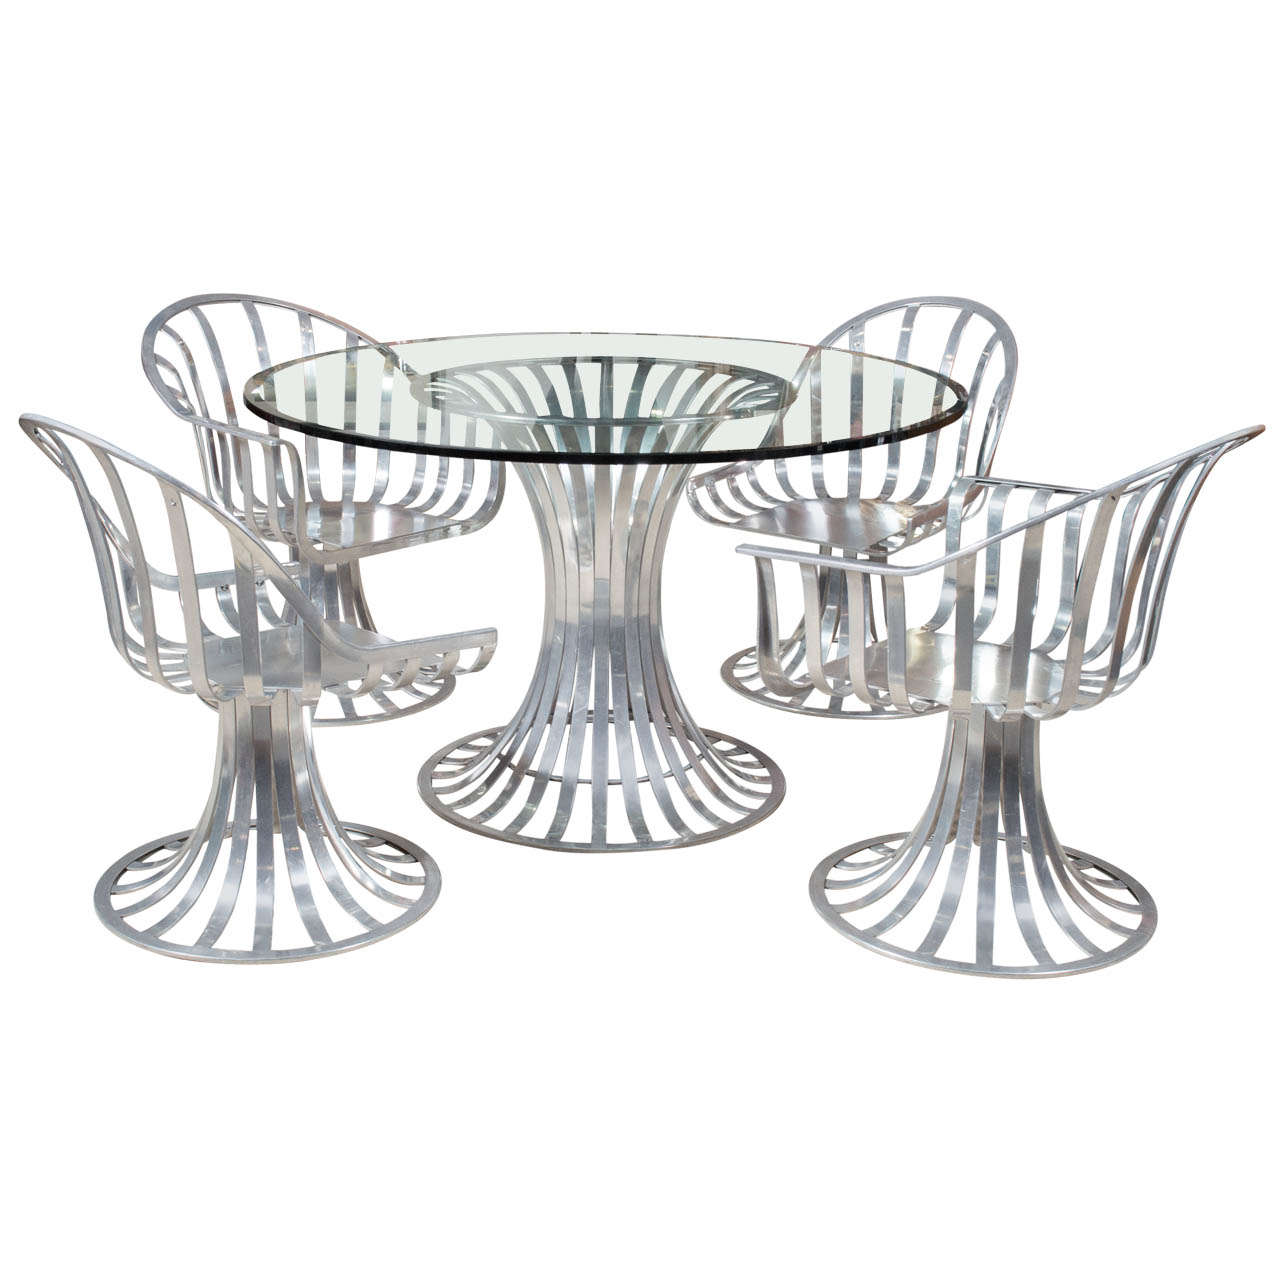 Russell Woodard Aluminum Patio Furniture, Table & Two Chairs